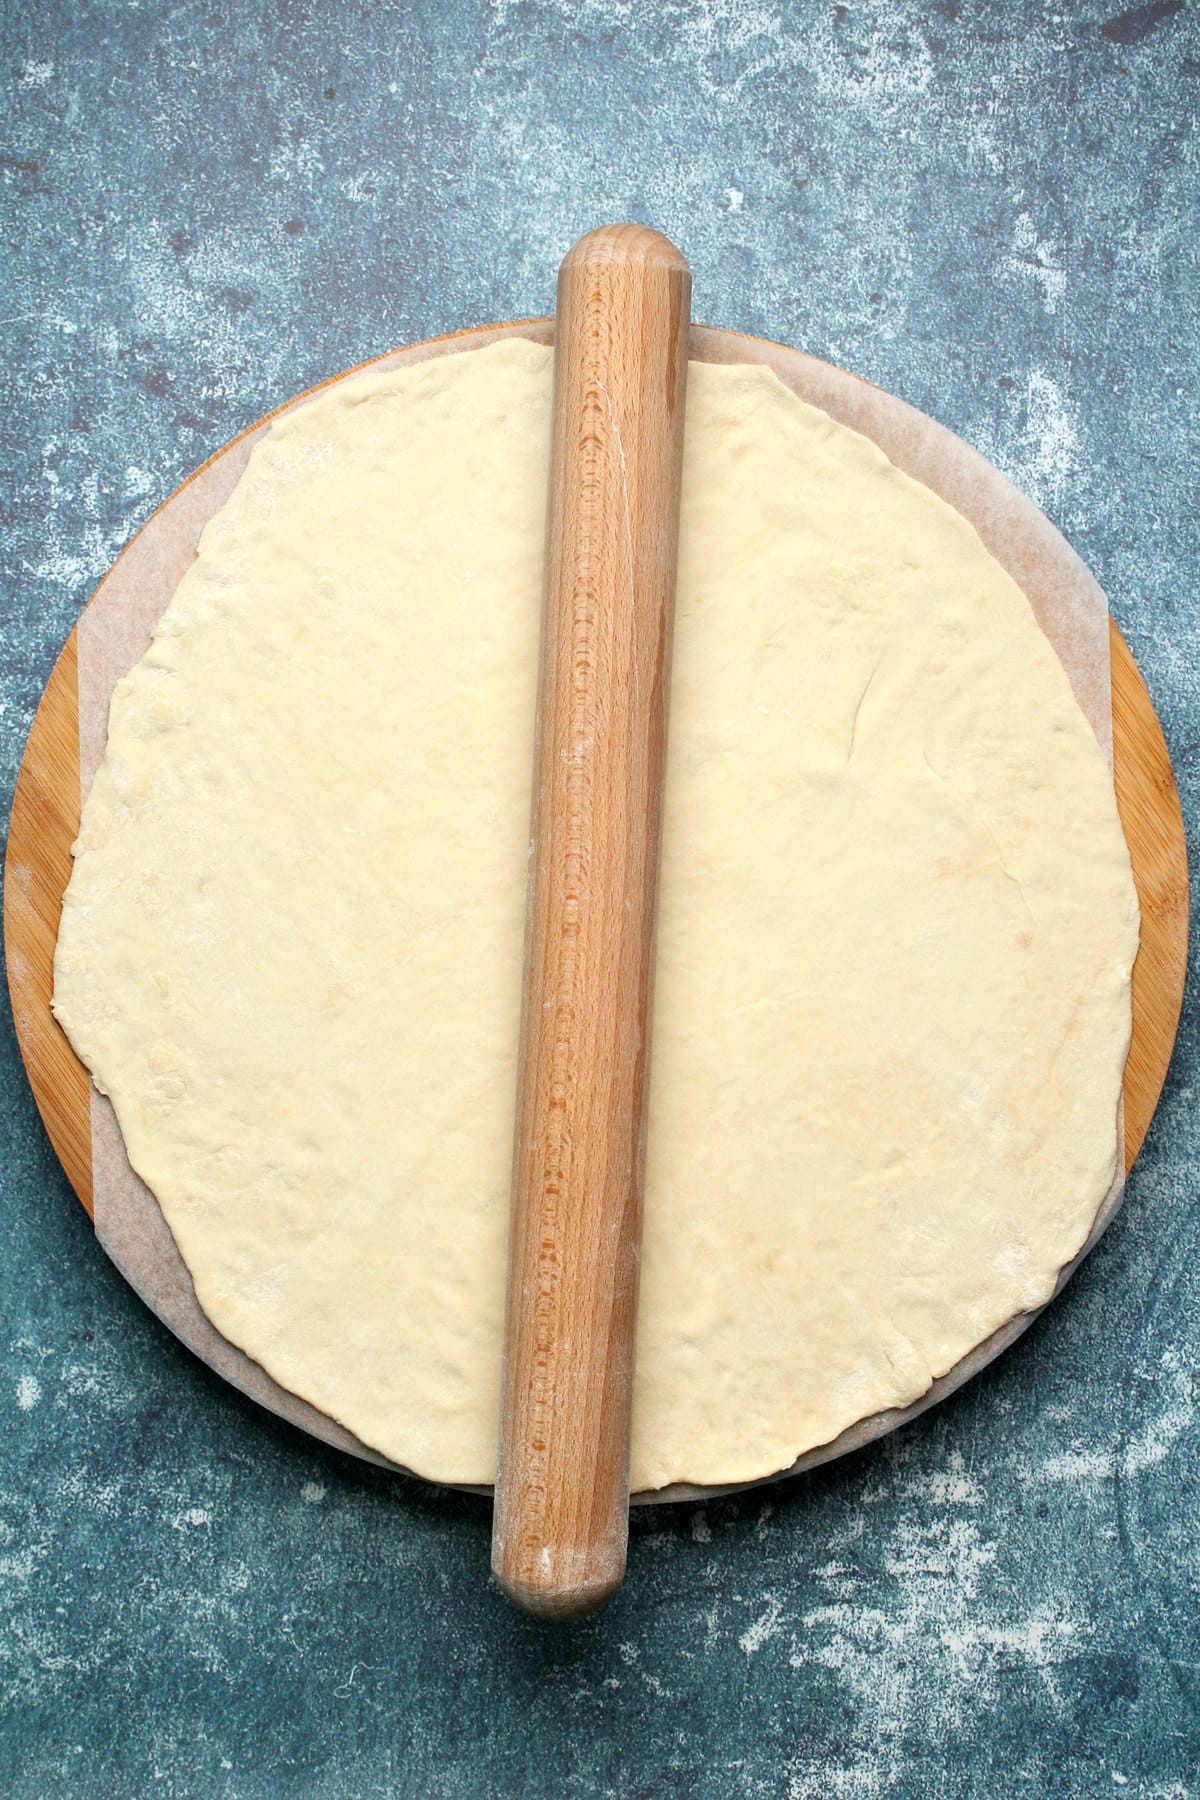 Rolled out pizza dough on parchment paper with a rolling pin.